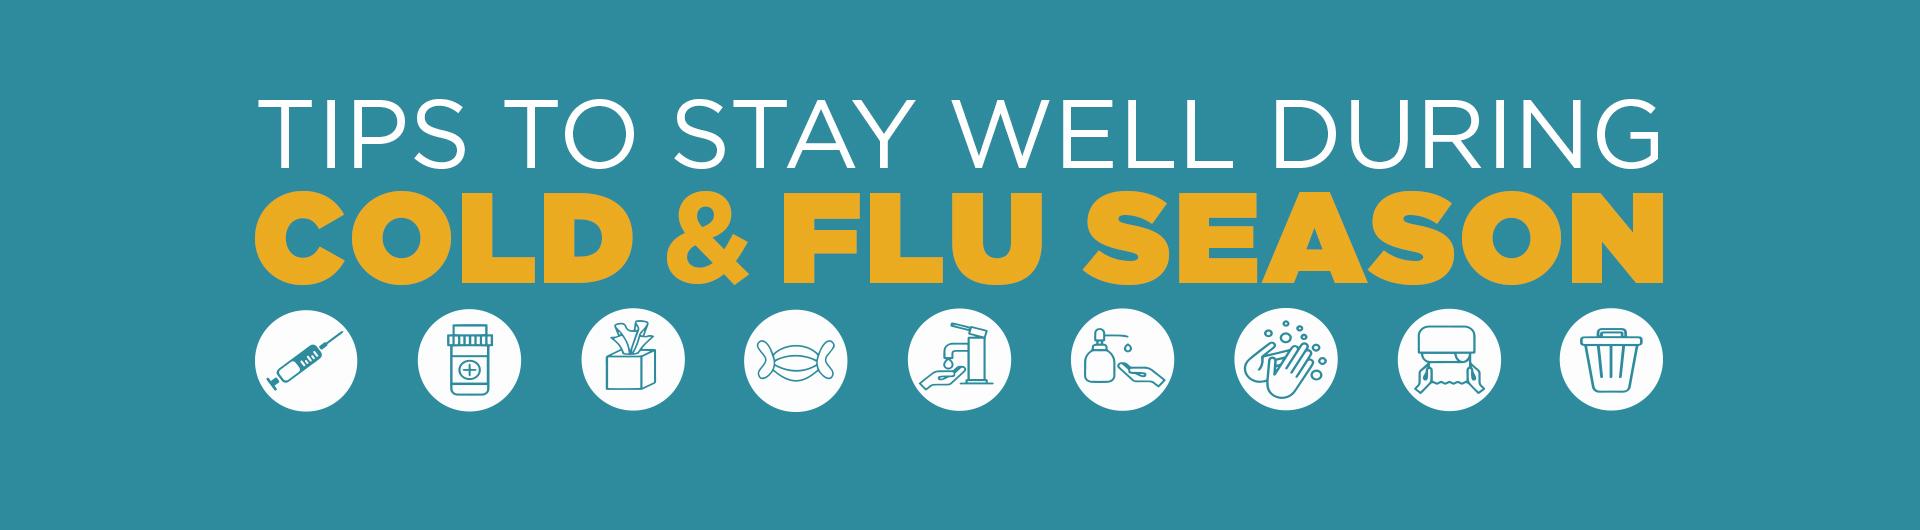 Banner for cold and flu season tips